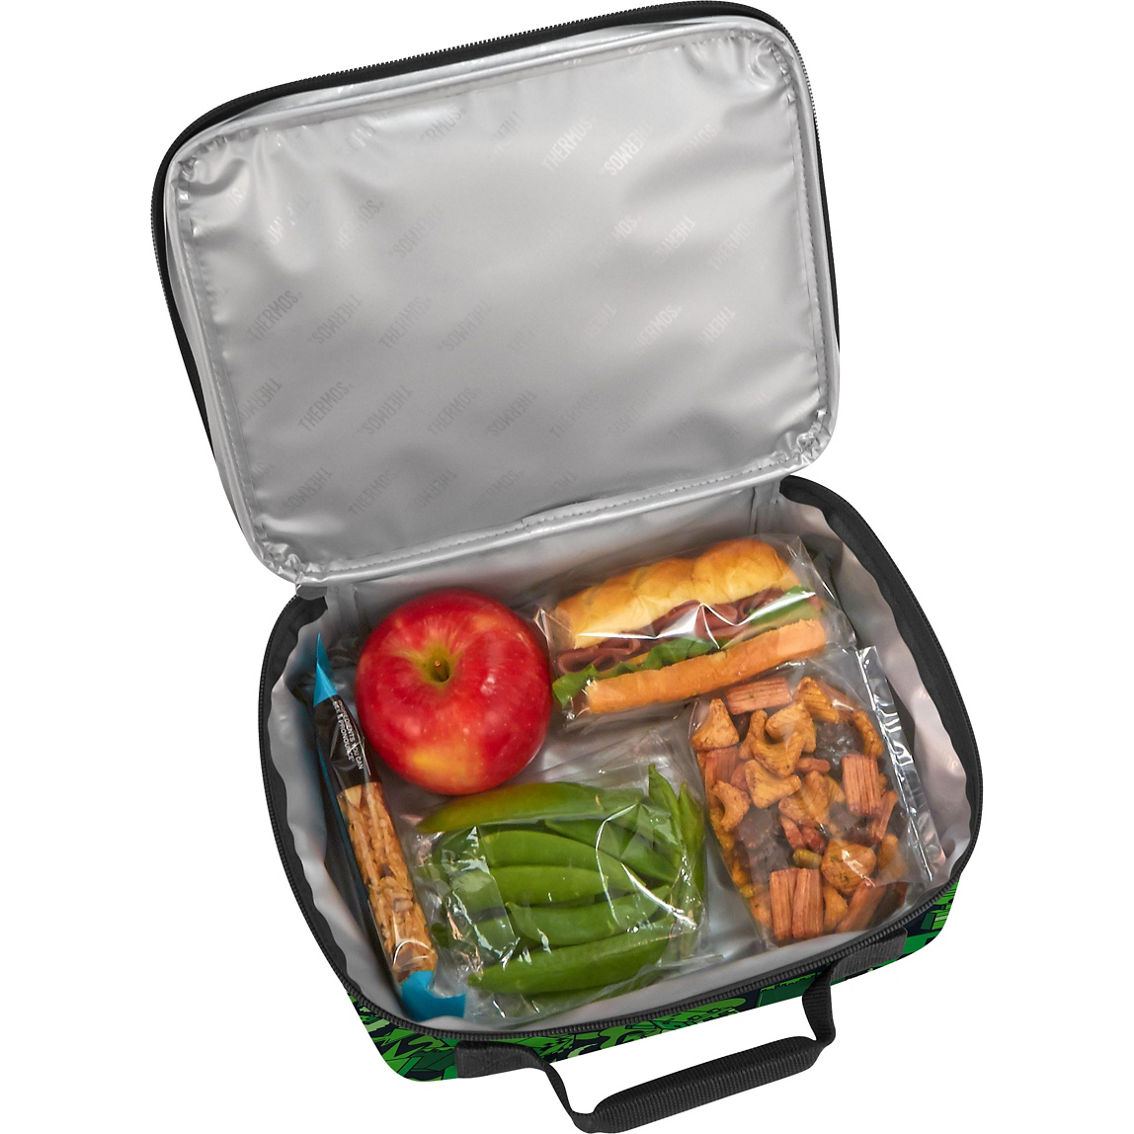 Thermos Minecraft Soft Lunch kit - Image 2 of 2